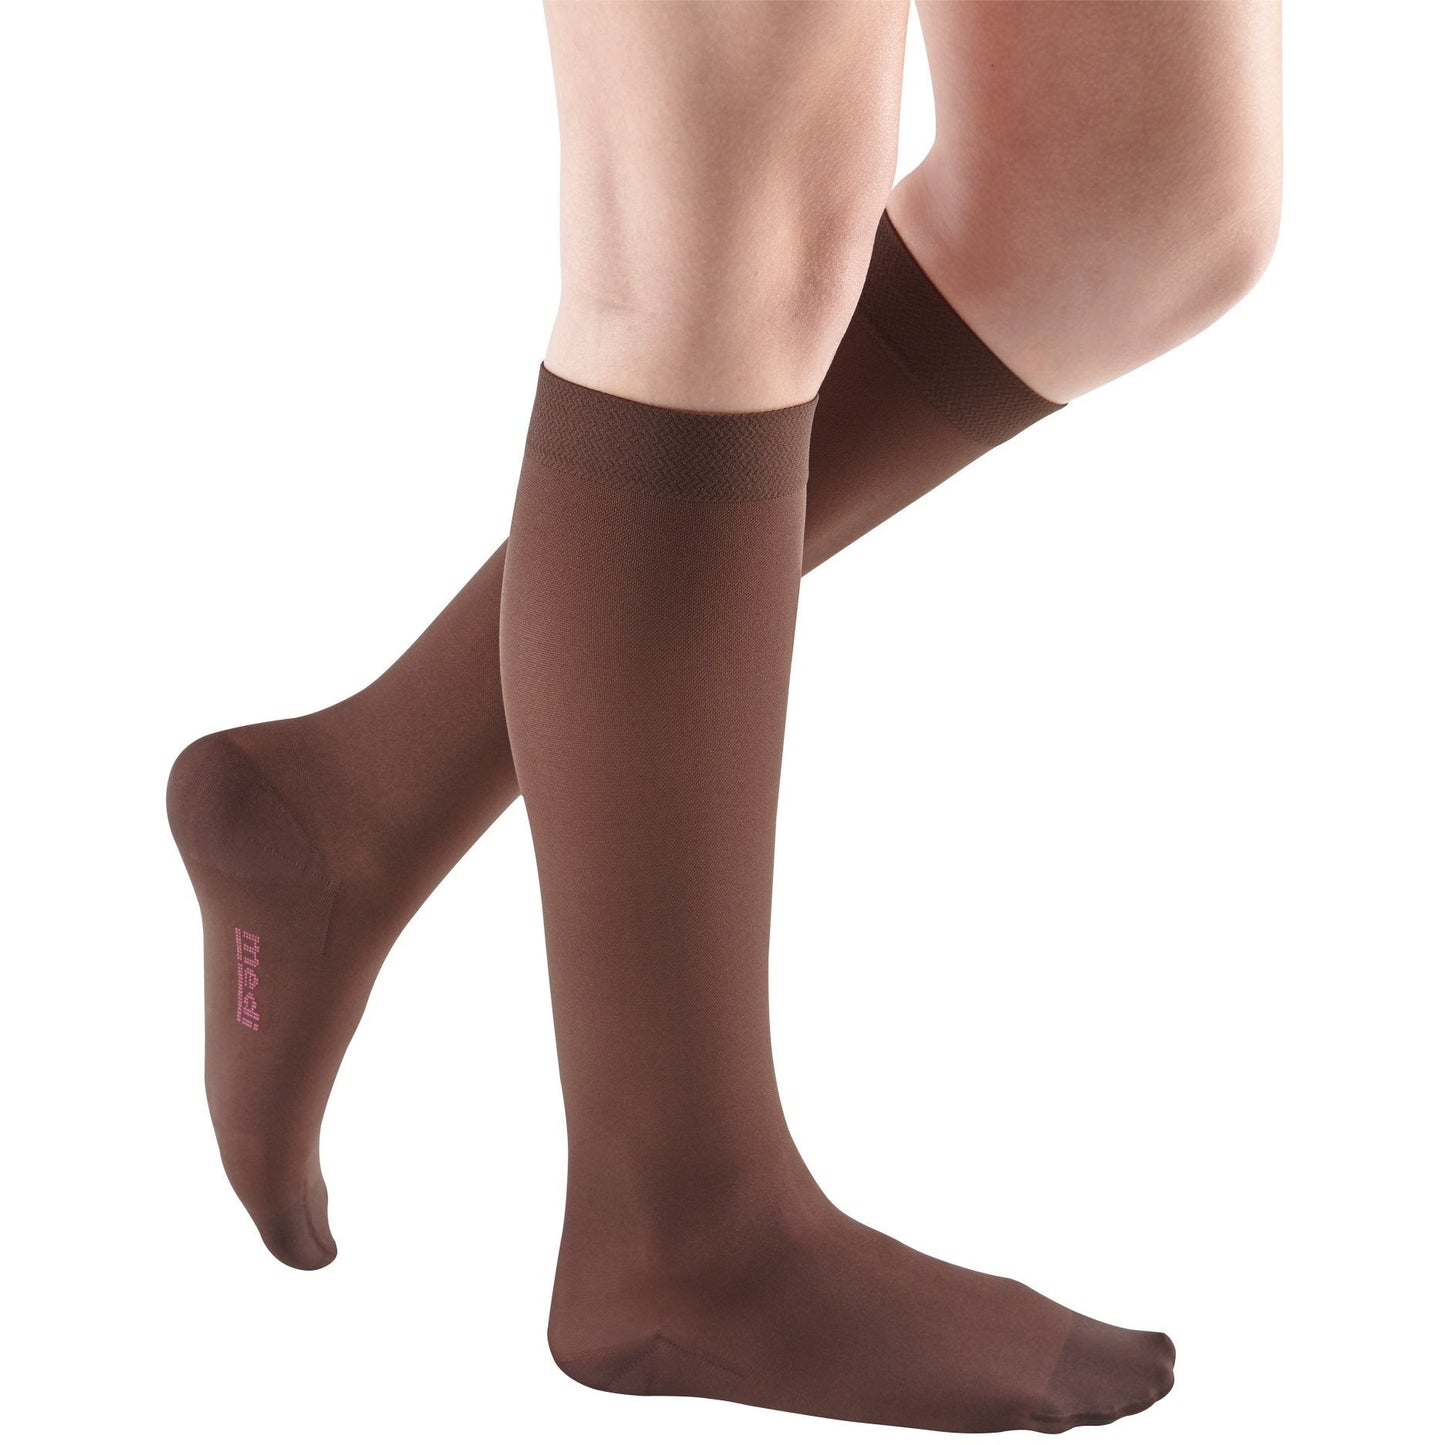 Medi Assure Pantyhose for Men and Women 20-30mmHg – Compression Store